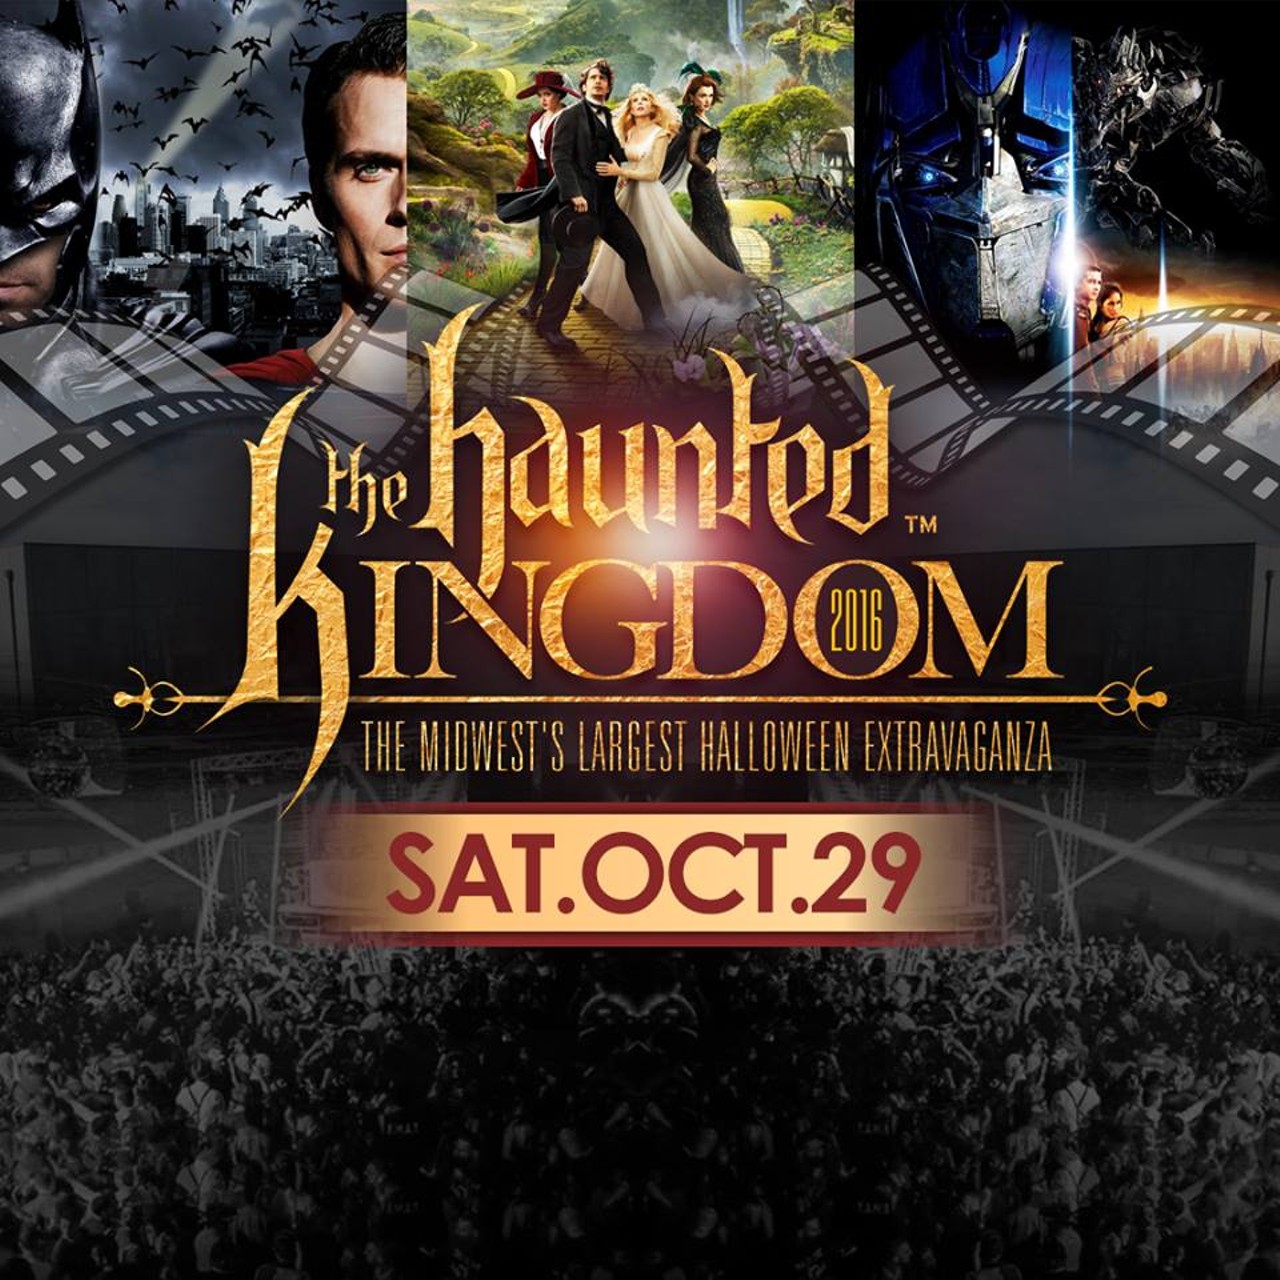 Oct. 29
The Haunted Kingdom Halloween Party
@ Michigan Motion Pictures Studio
The Haunted Kingdom is trying again to break the Guinness World Record for largest Halloween gathering, and it definitely is bringing its A-game this year. The event, which describes its attendees as &#147;Detroit&#146;s sexiest ghouls and goblins,&#148; will certainly be something to see. Also, there will be a slew of performers and shows, as well as costume contests to participate in. Tickets are currently $20.
8 p.m.; 1999 Centerpoint Pkwy., Pontiac; 248-671-3486; hauntedkingdom.com